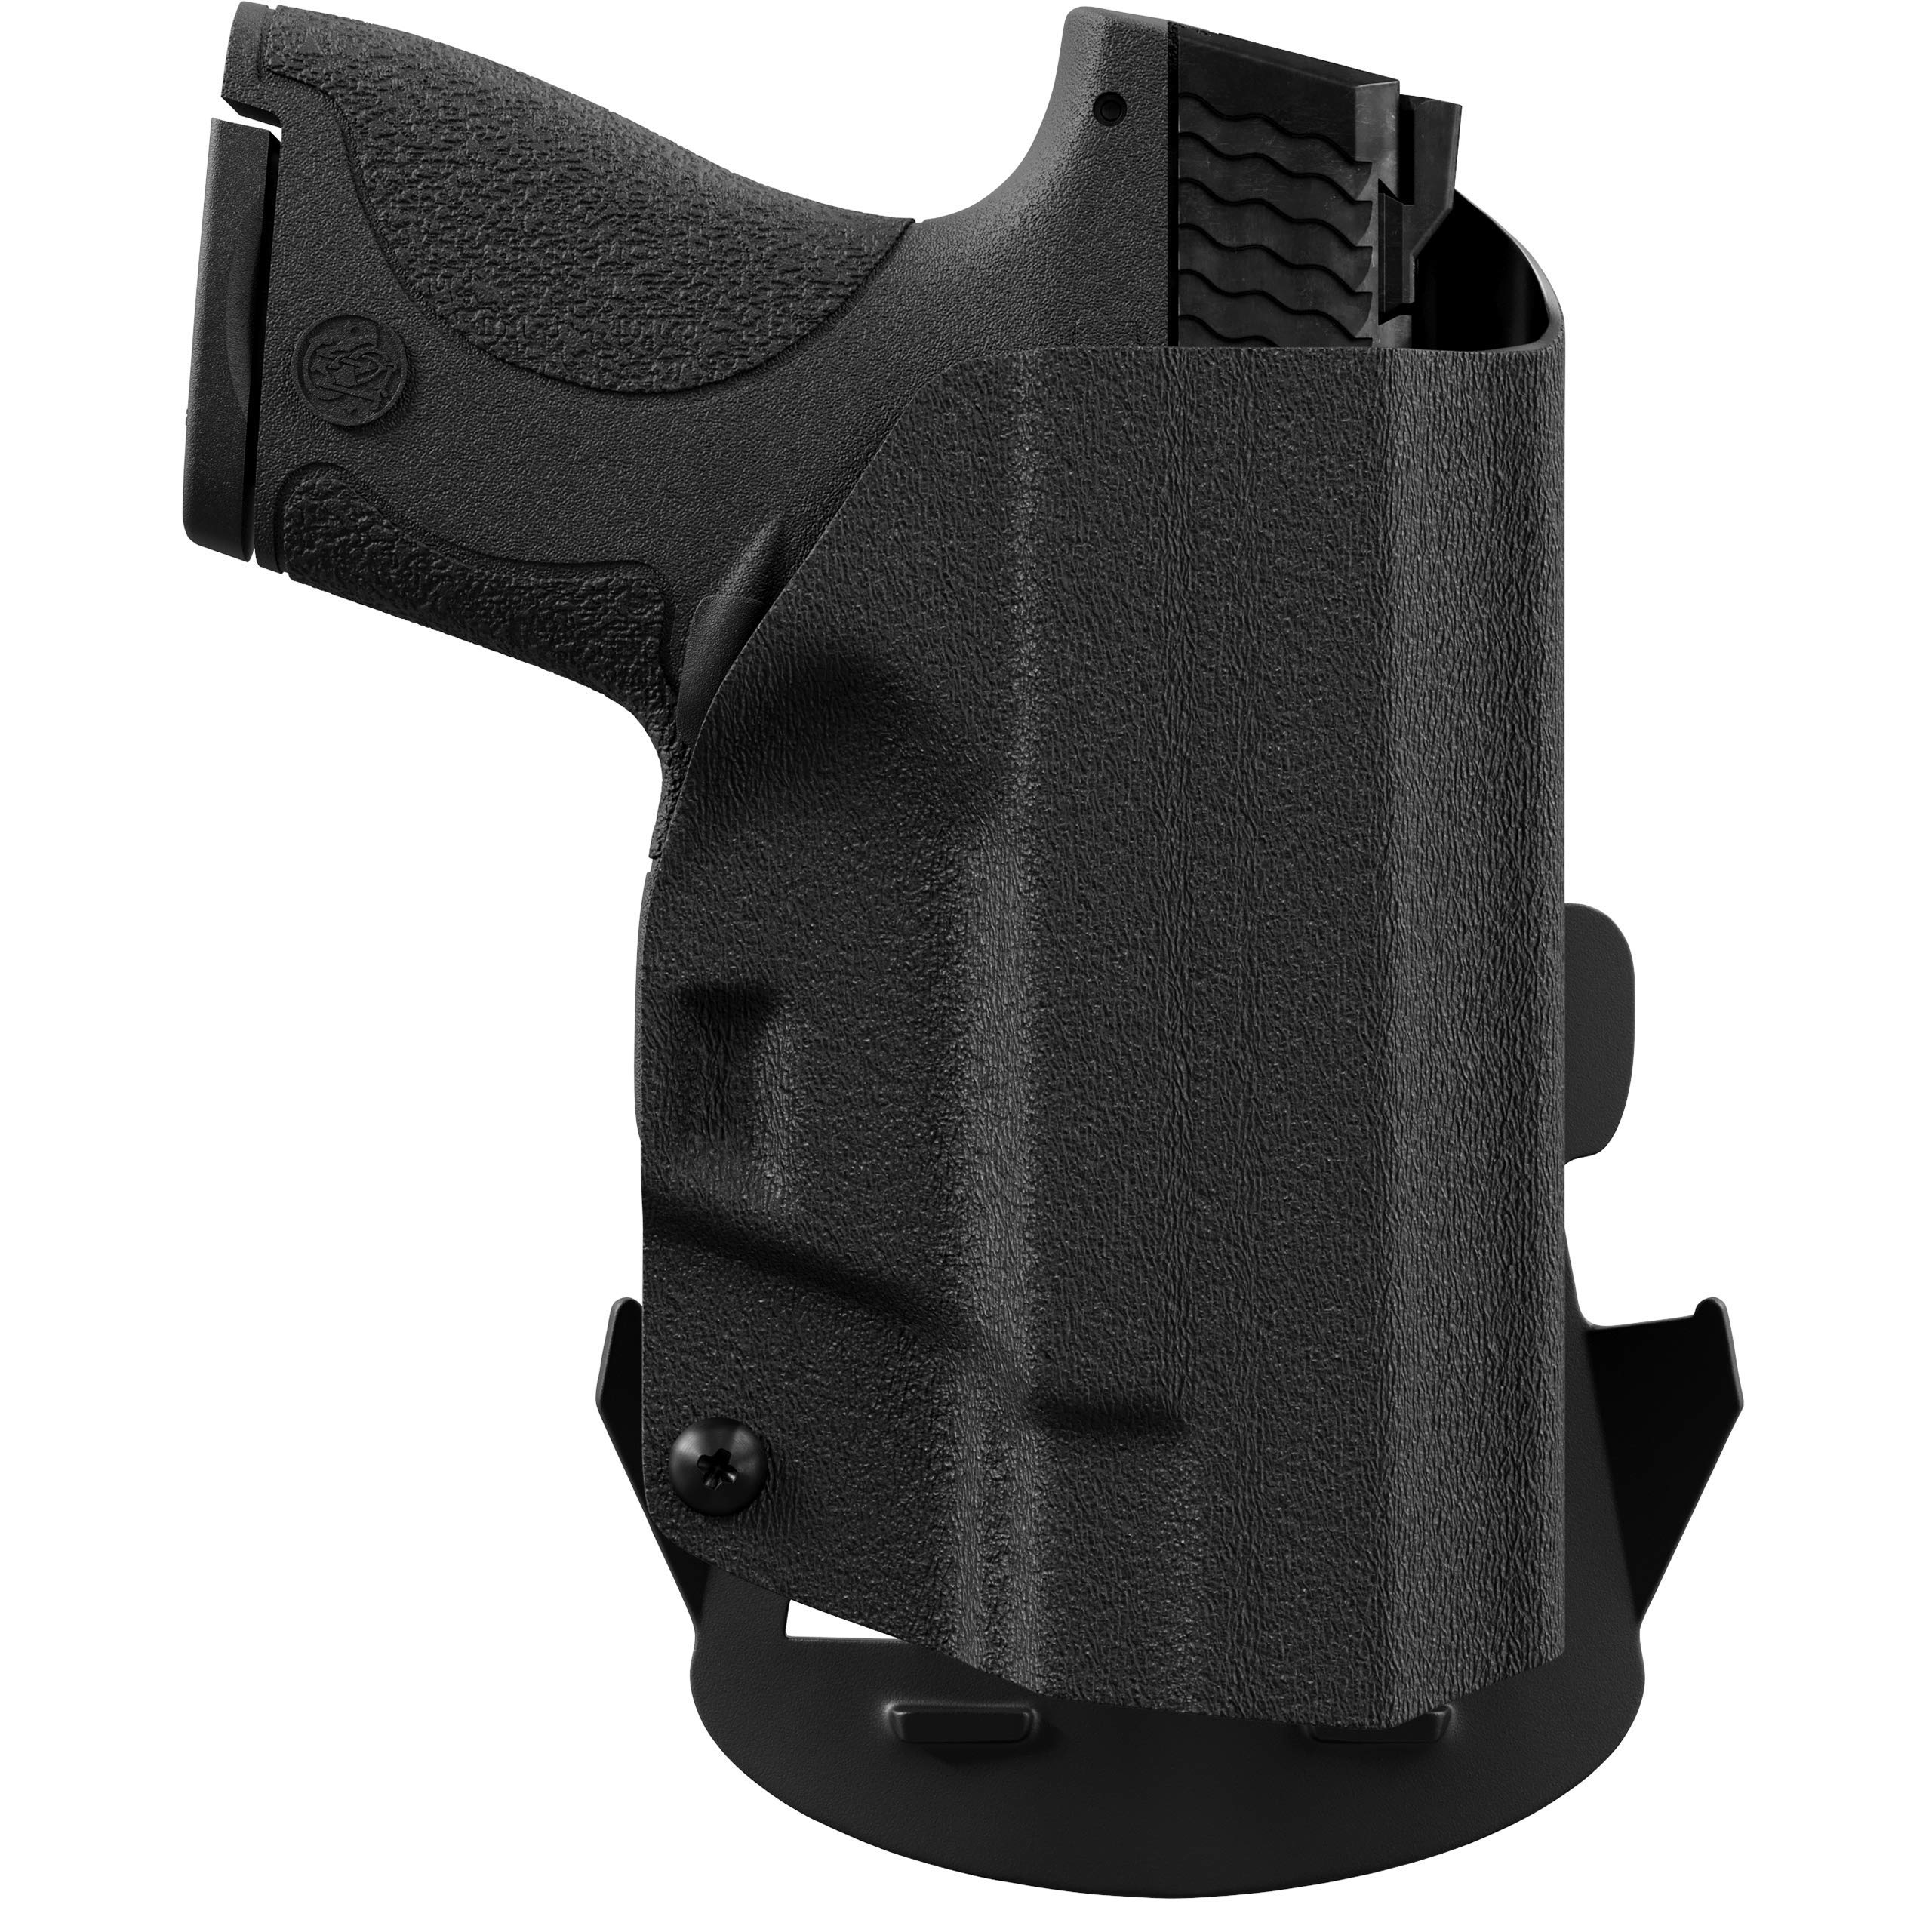 We The People Holsters - Black - Left Hand - Owb Holster Compatible With Walther Creed